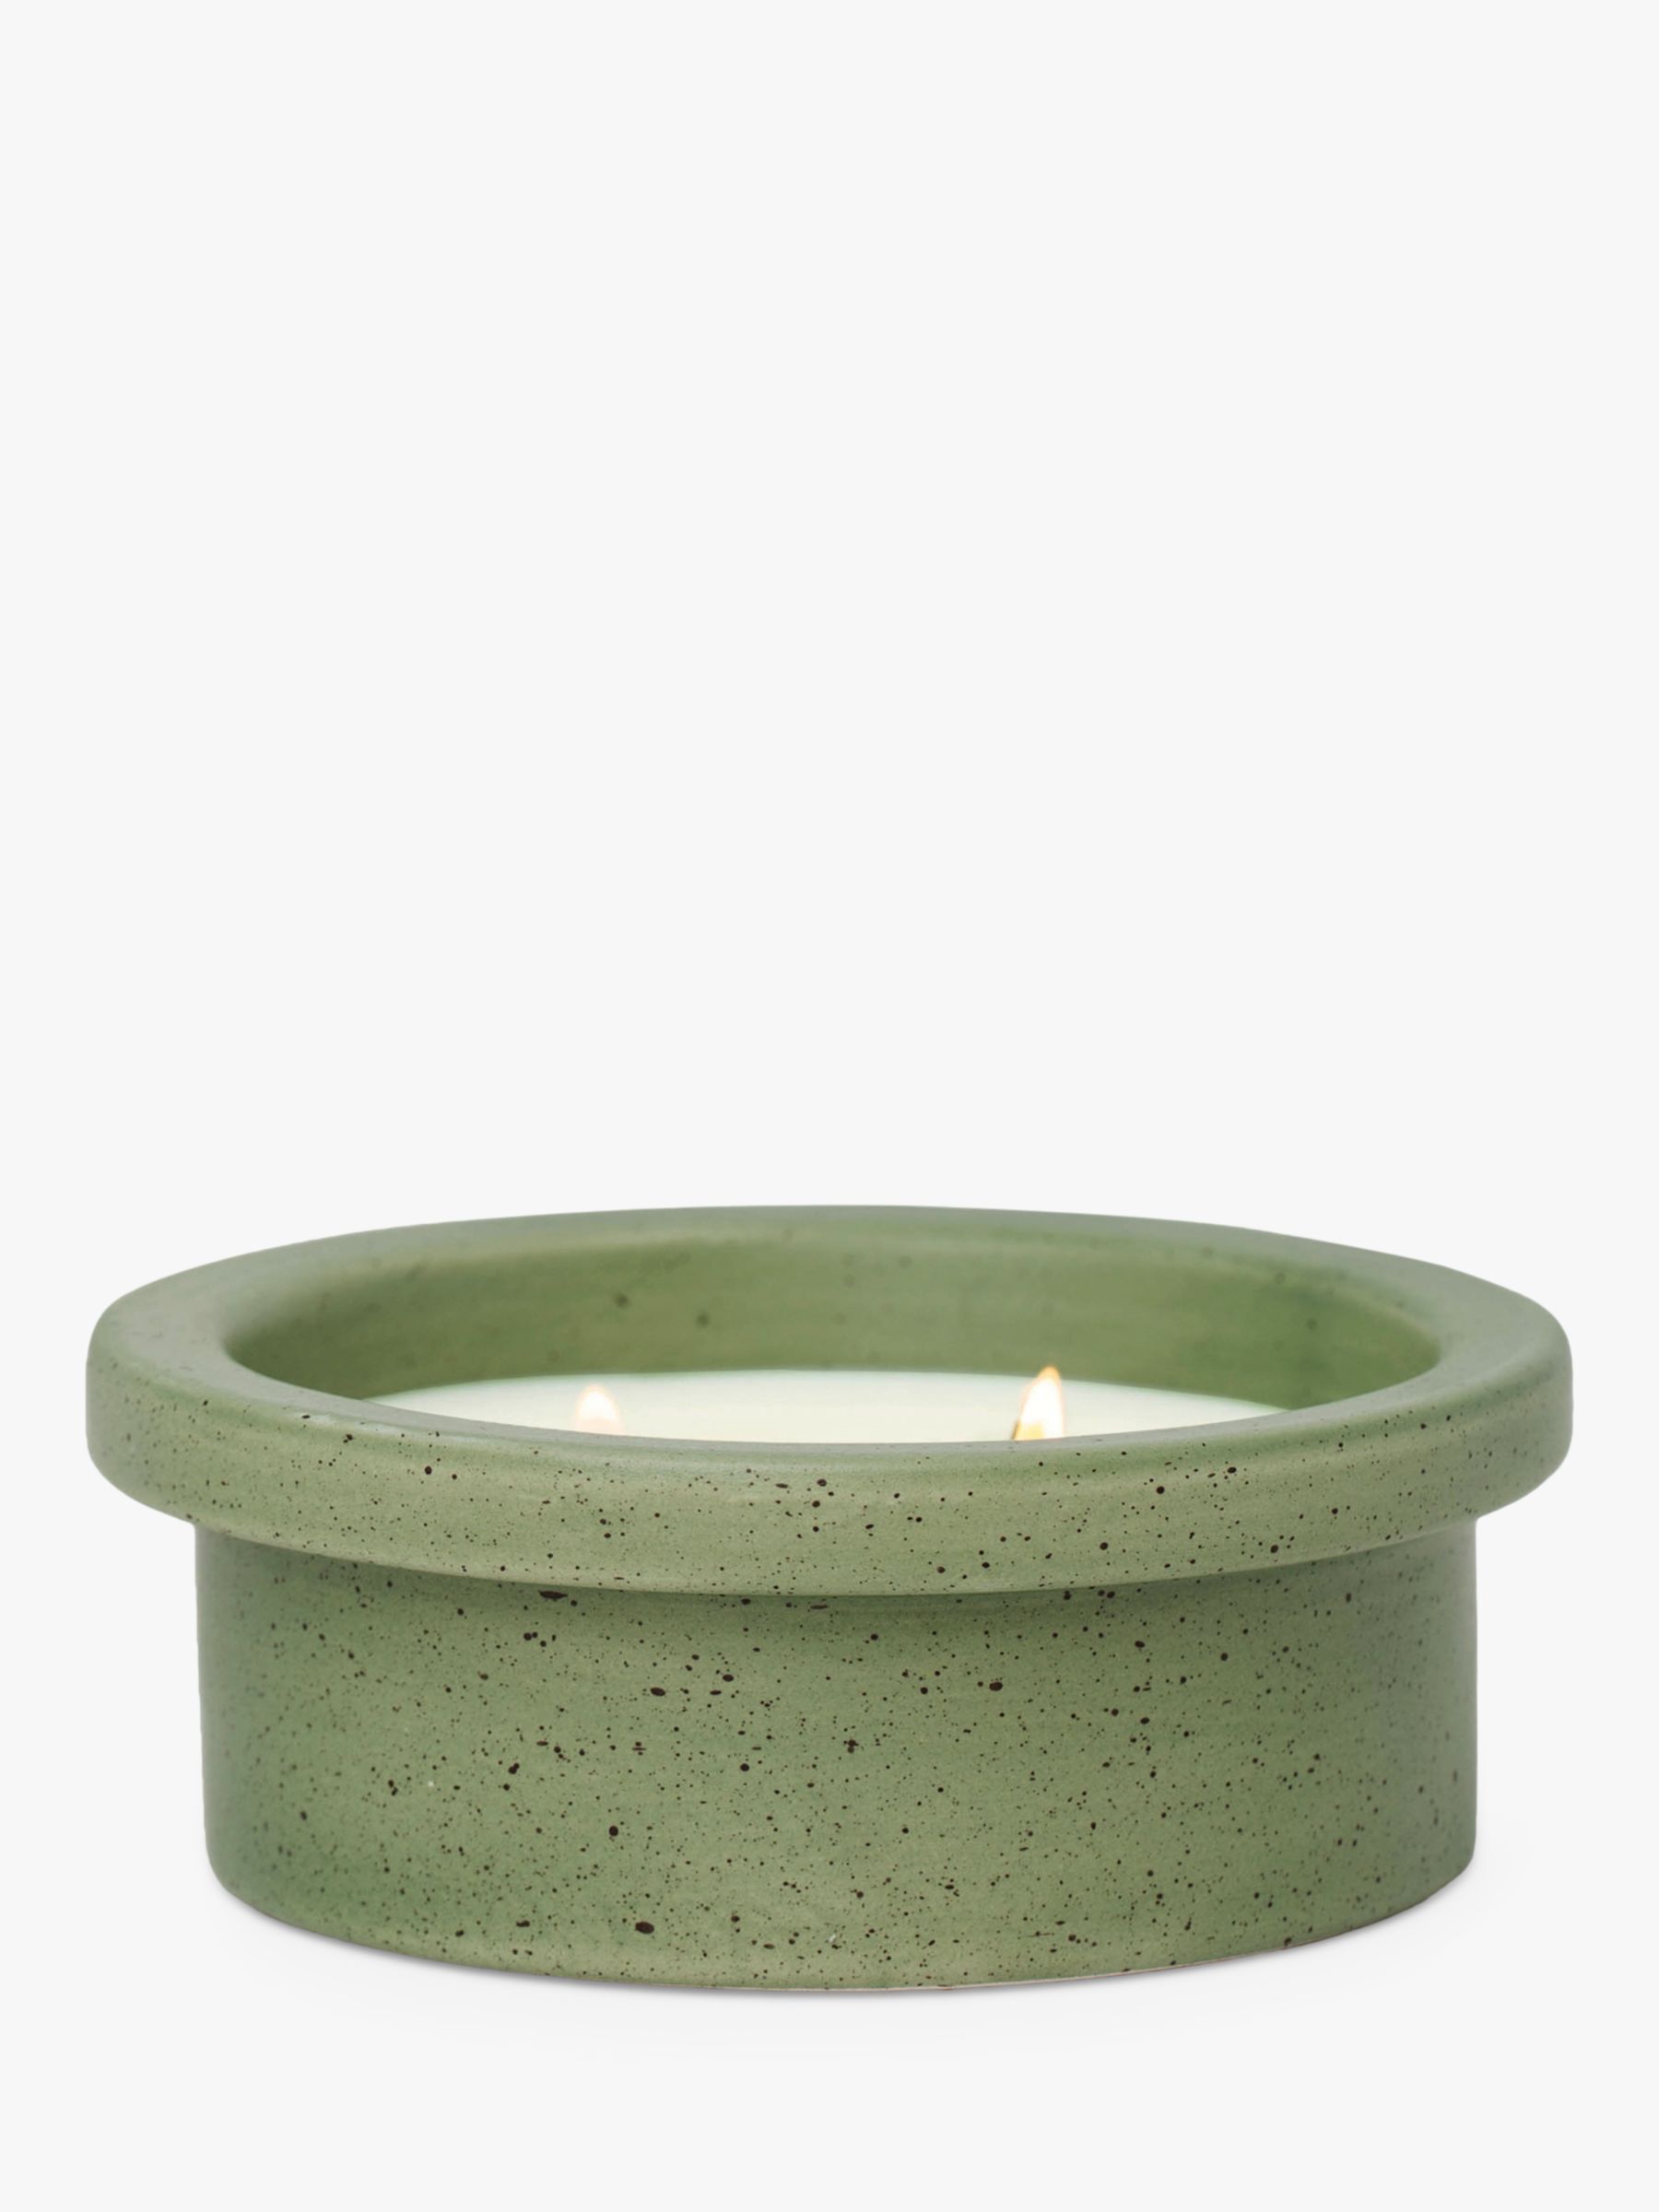 Olive Leaf Aromatic Candle